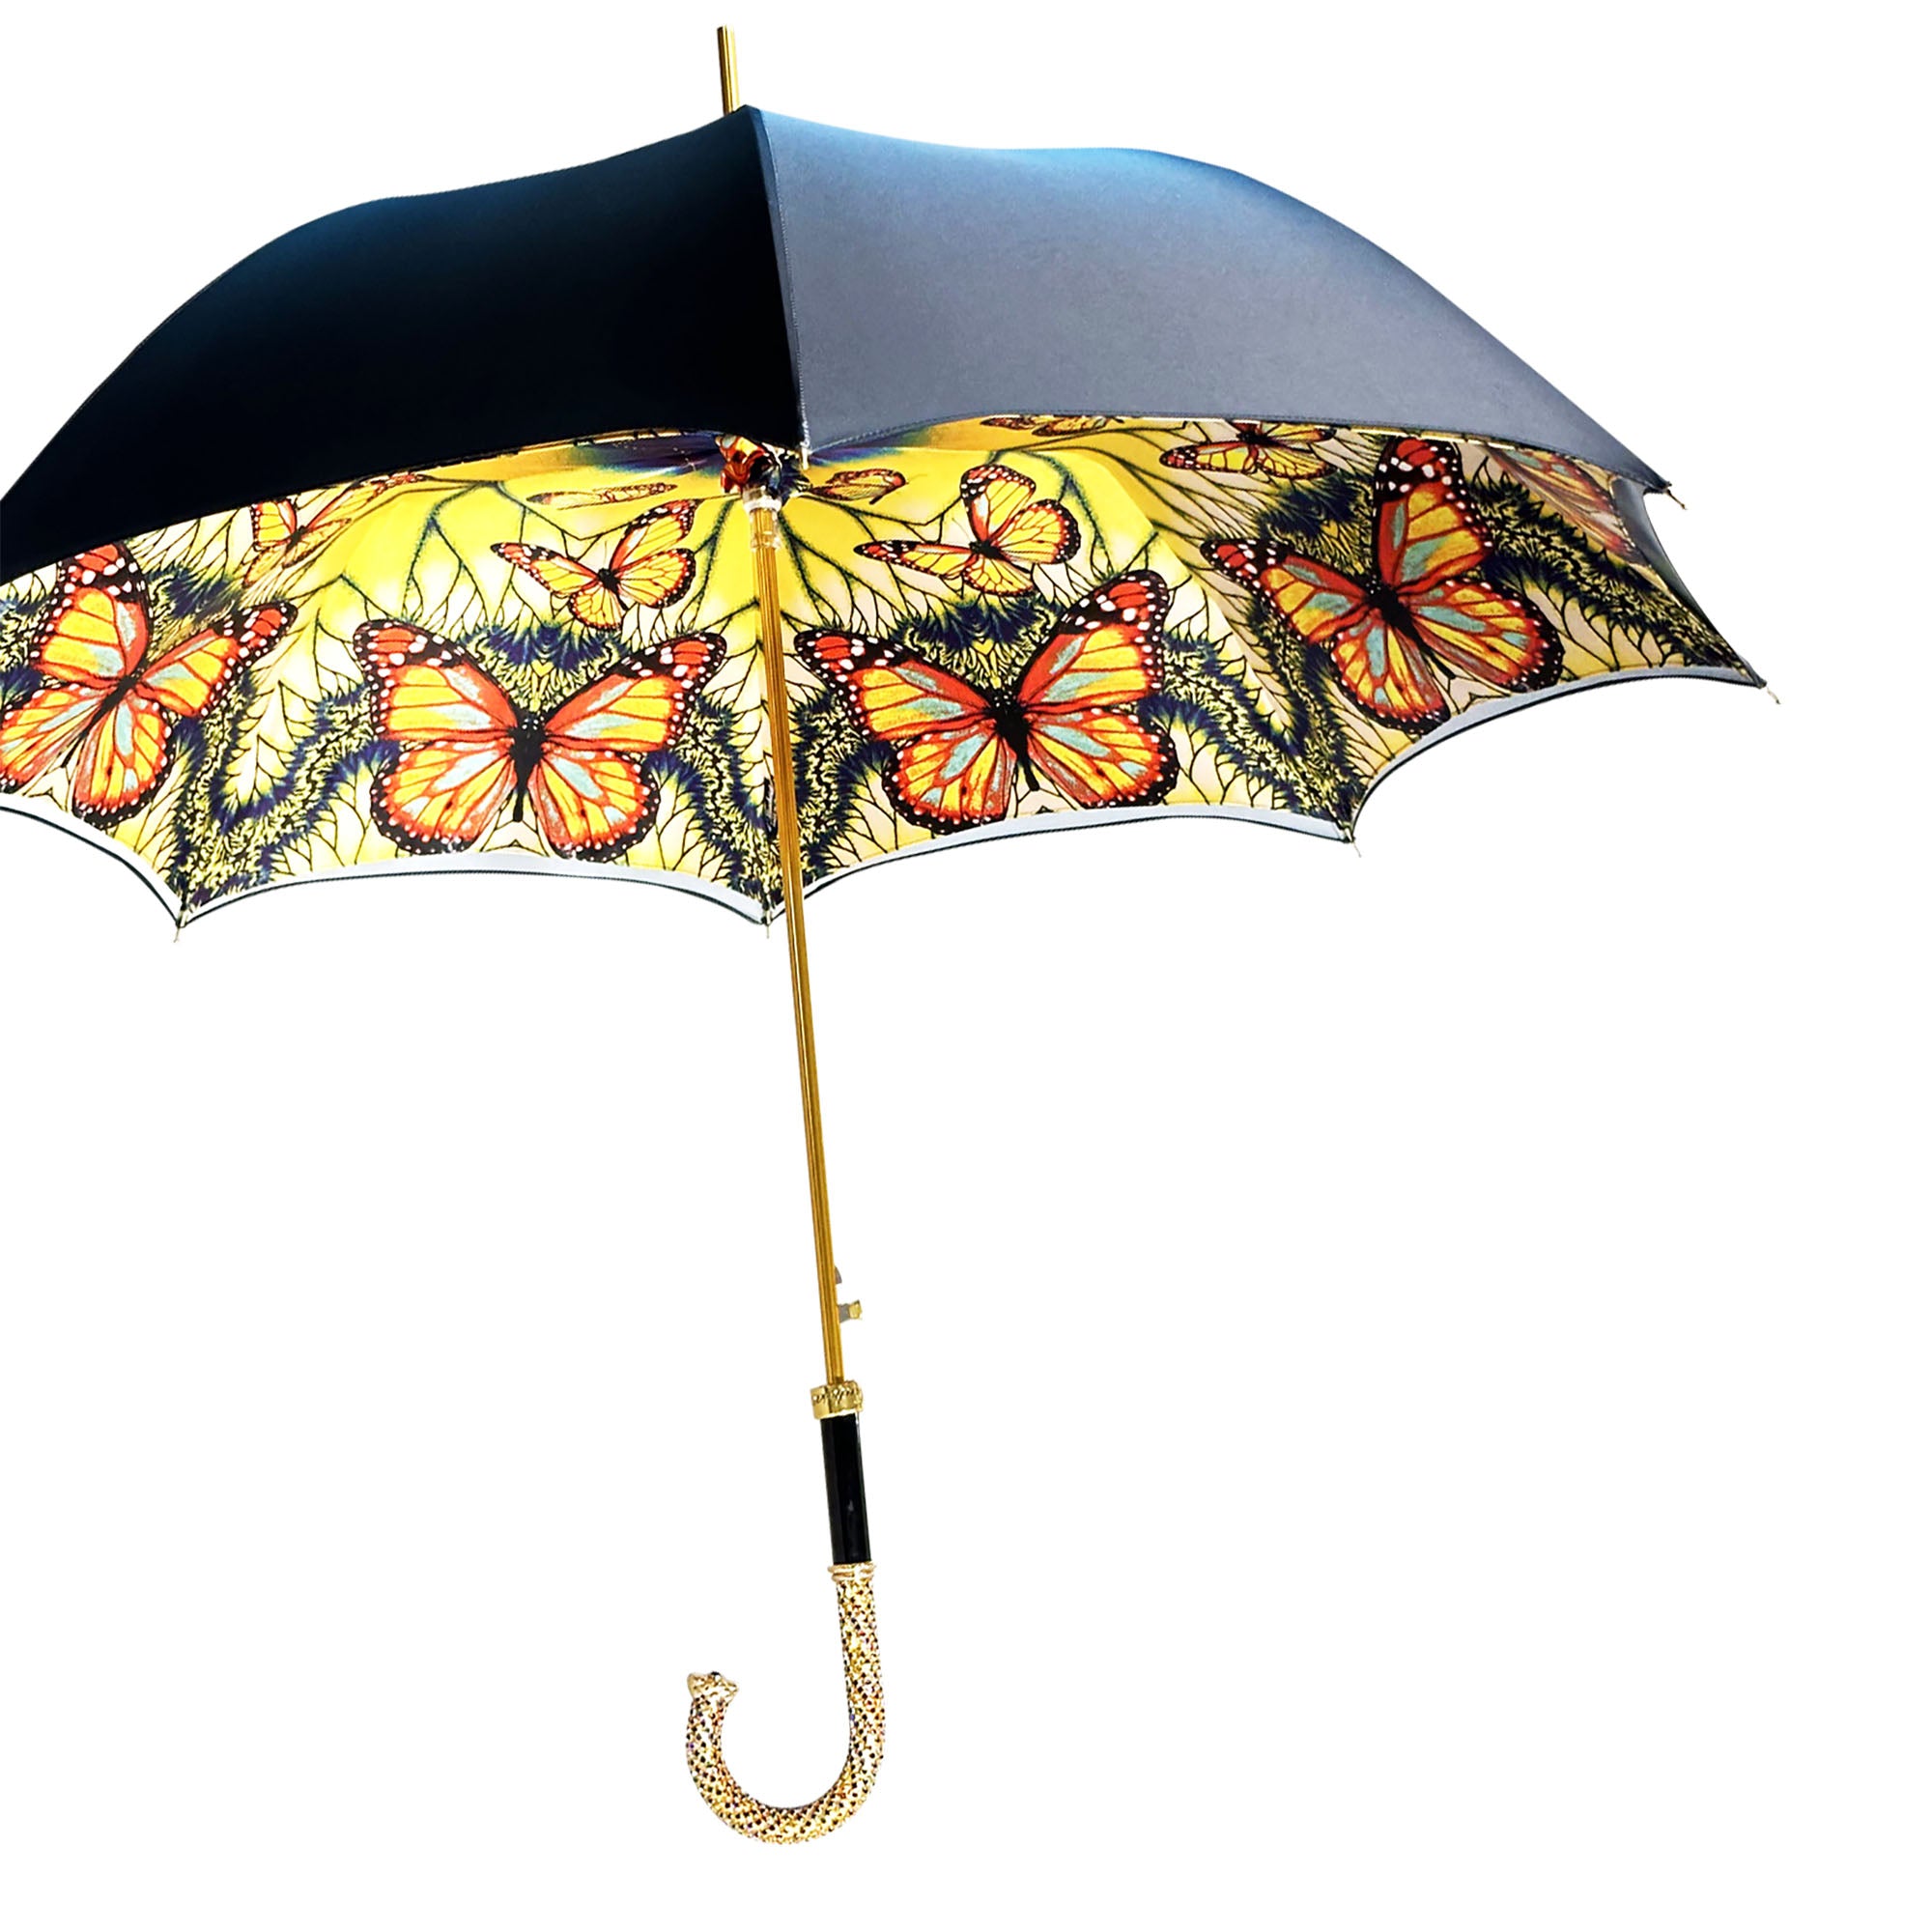 Beautiful Double Canopy Umbrella with butterfly design